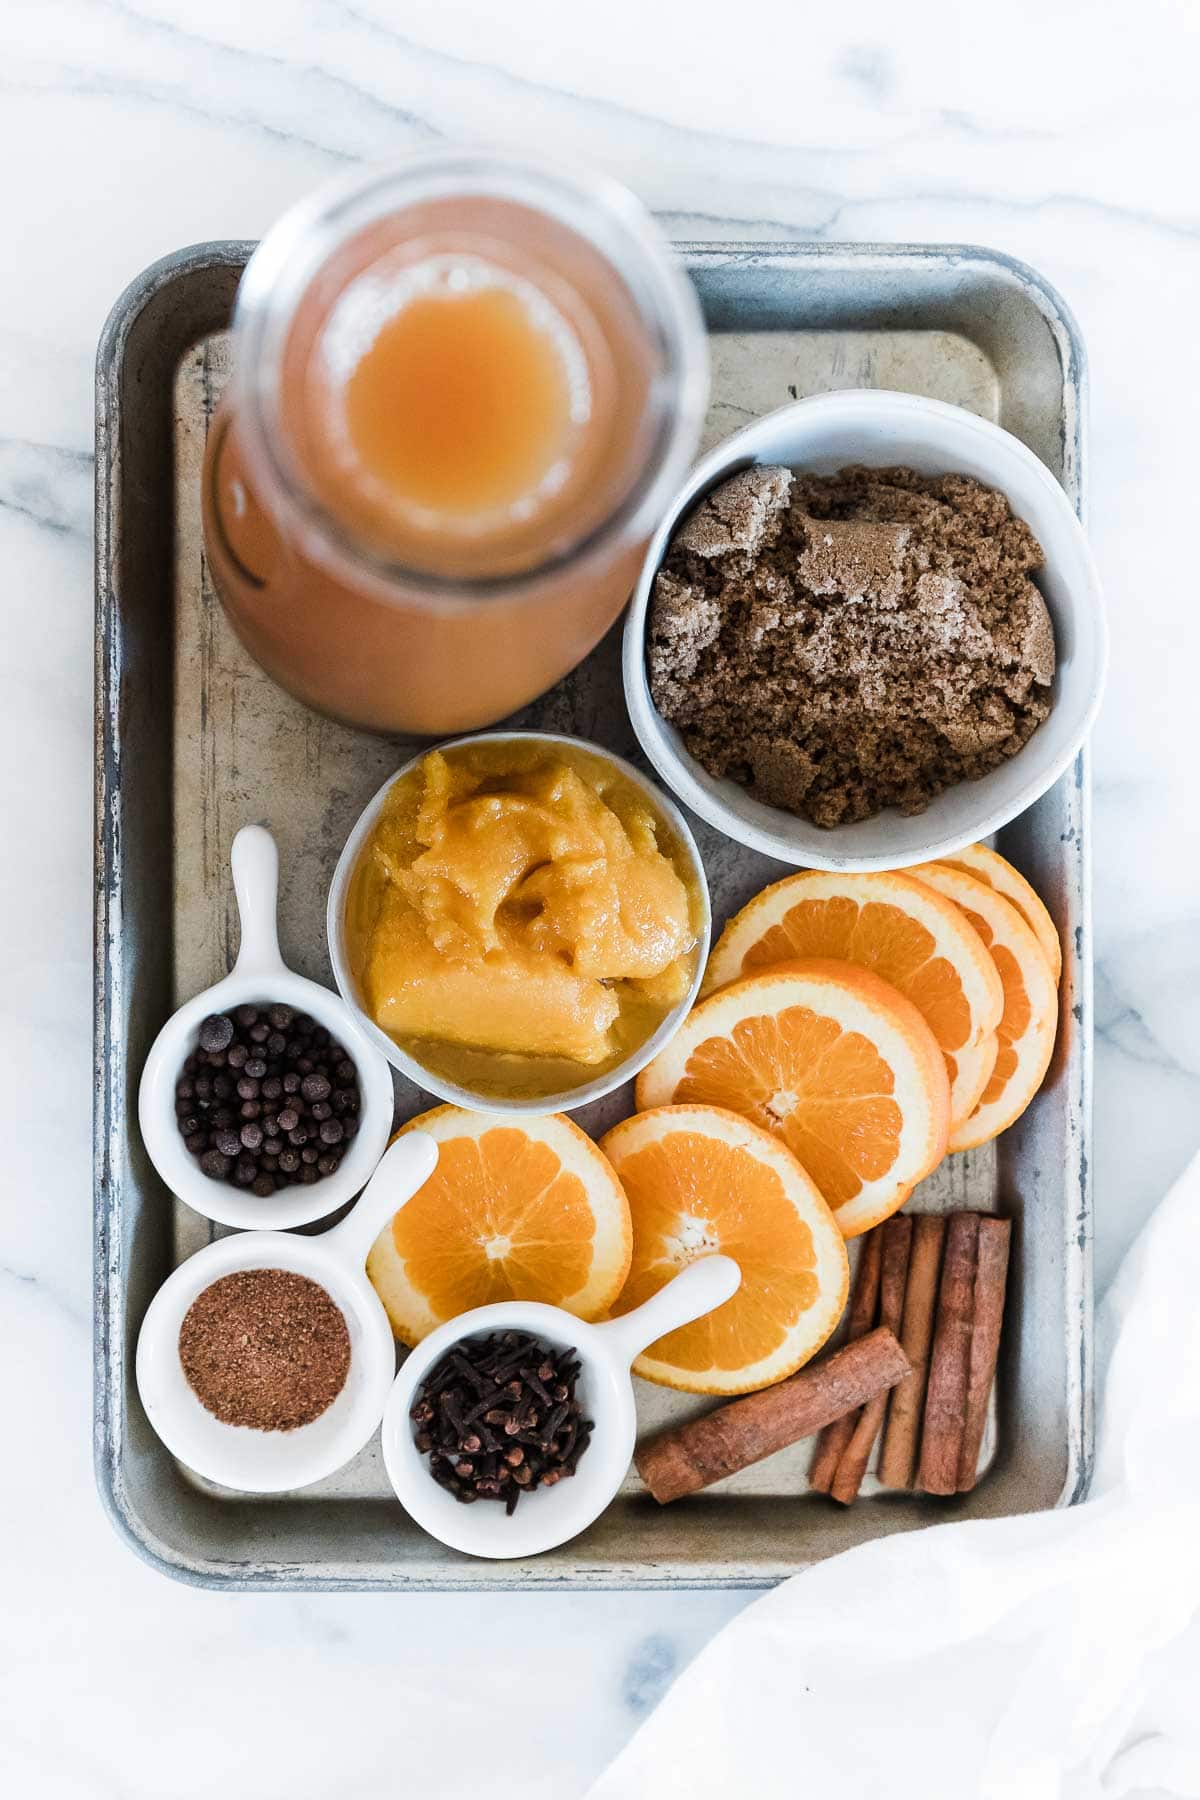 Apple cider, brown sugar, orange slices, and spices on a tray.